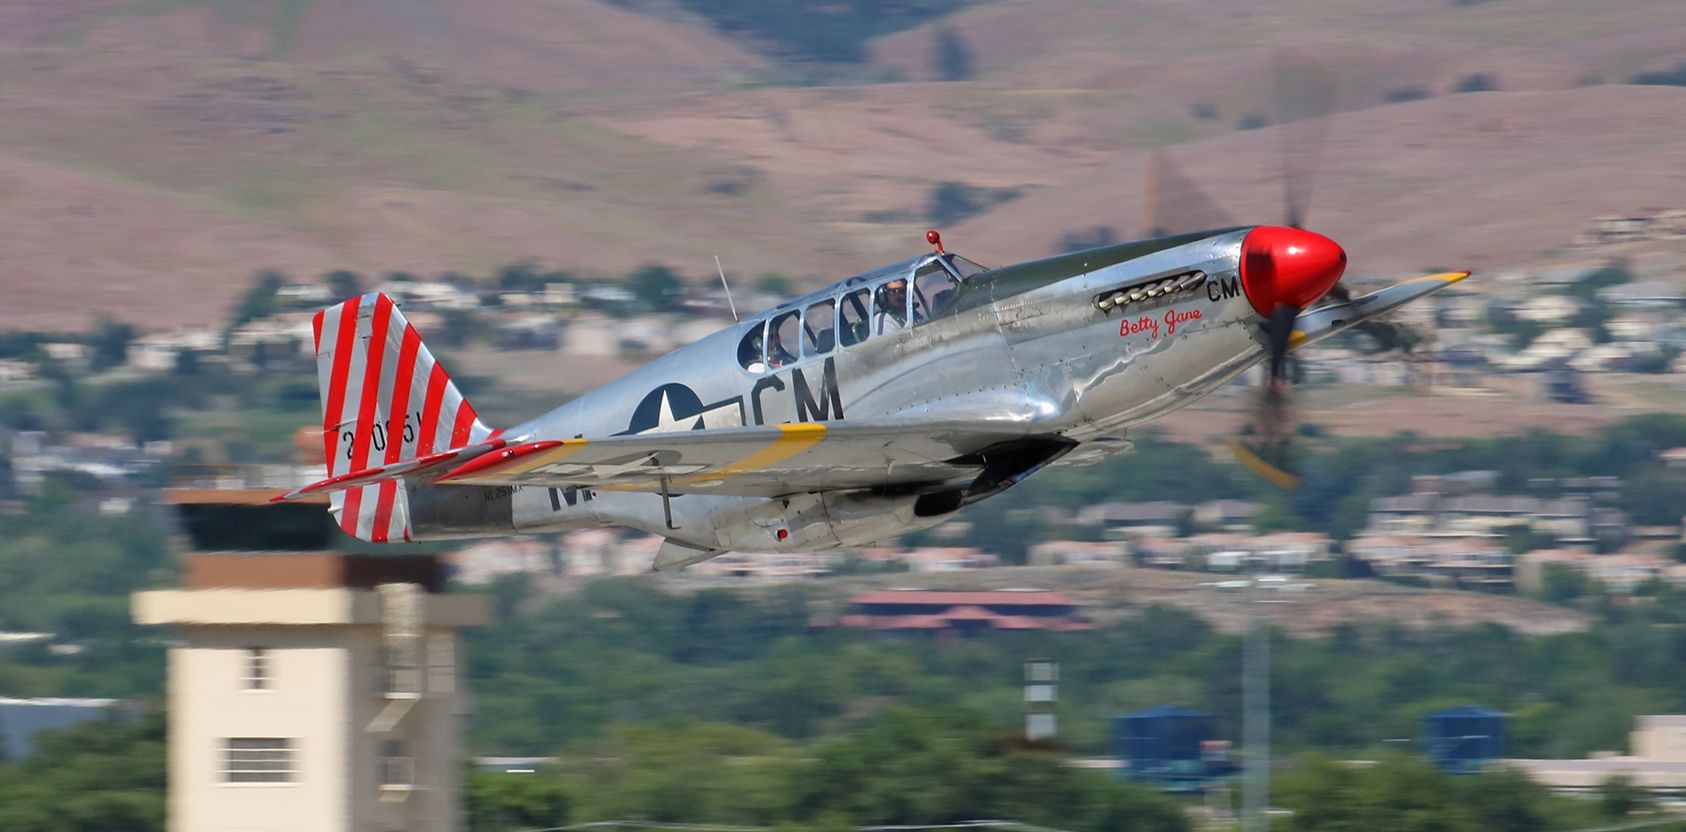 NL251MX — - "Betty Jane," the Collings Foundations P-51 Mustang (North American TP-51C) comes blazing past my rooftop location as it climbs away from Reno Tahoe Internationals runway 34R this morning.